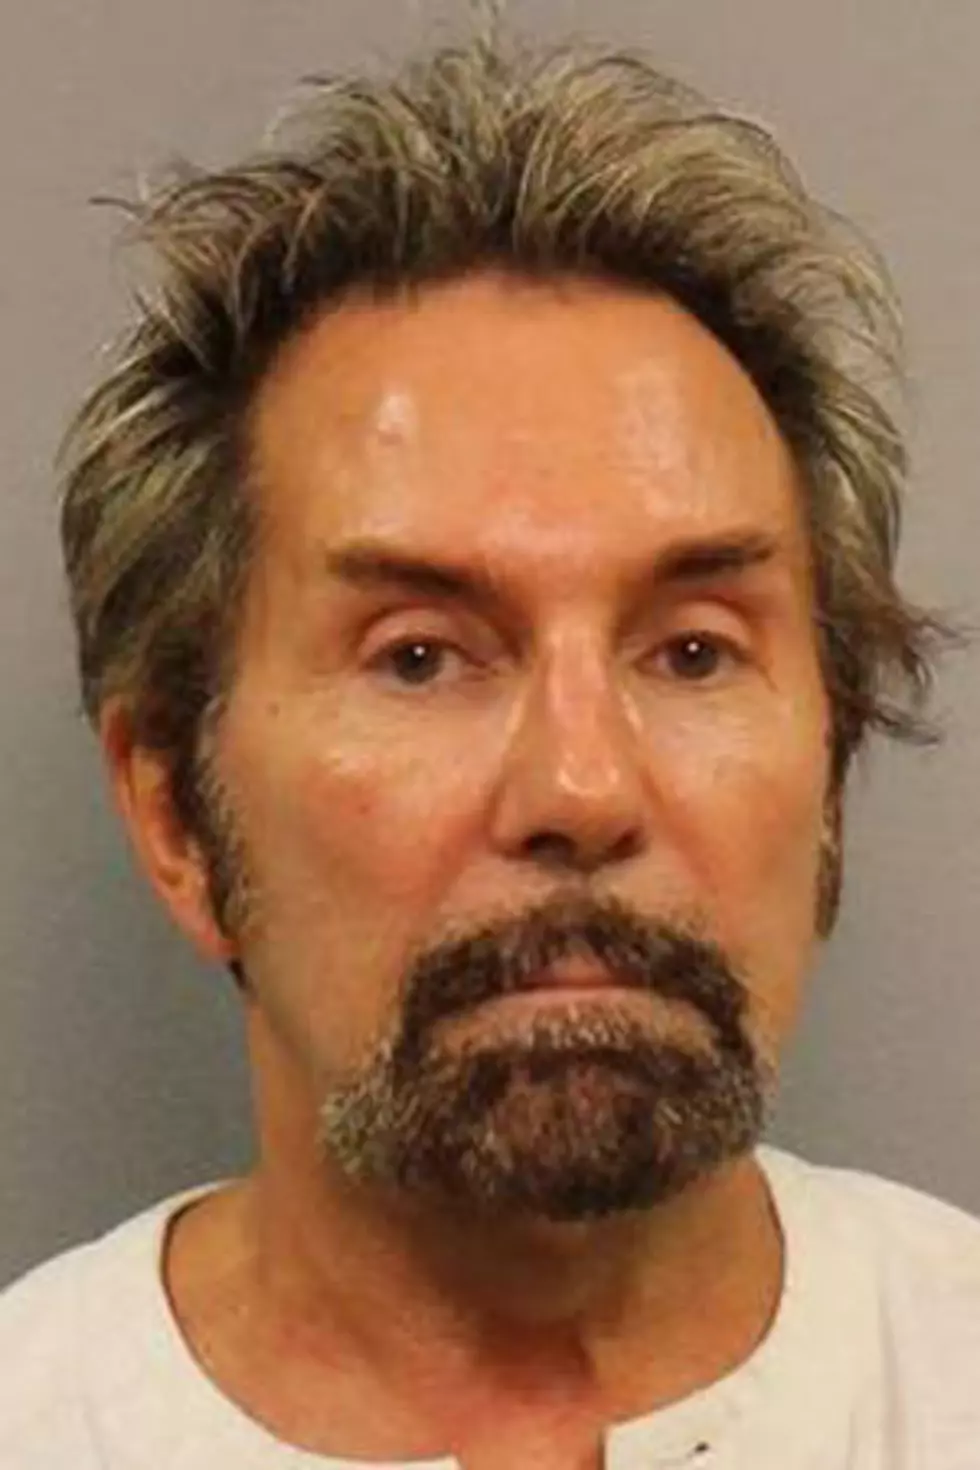 Famed Country Music Producer Tony Brown Arrested on Domestic Assault Charges